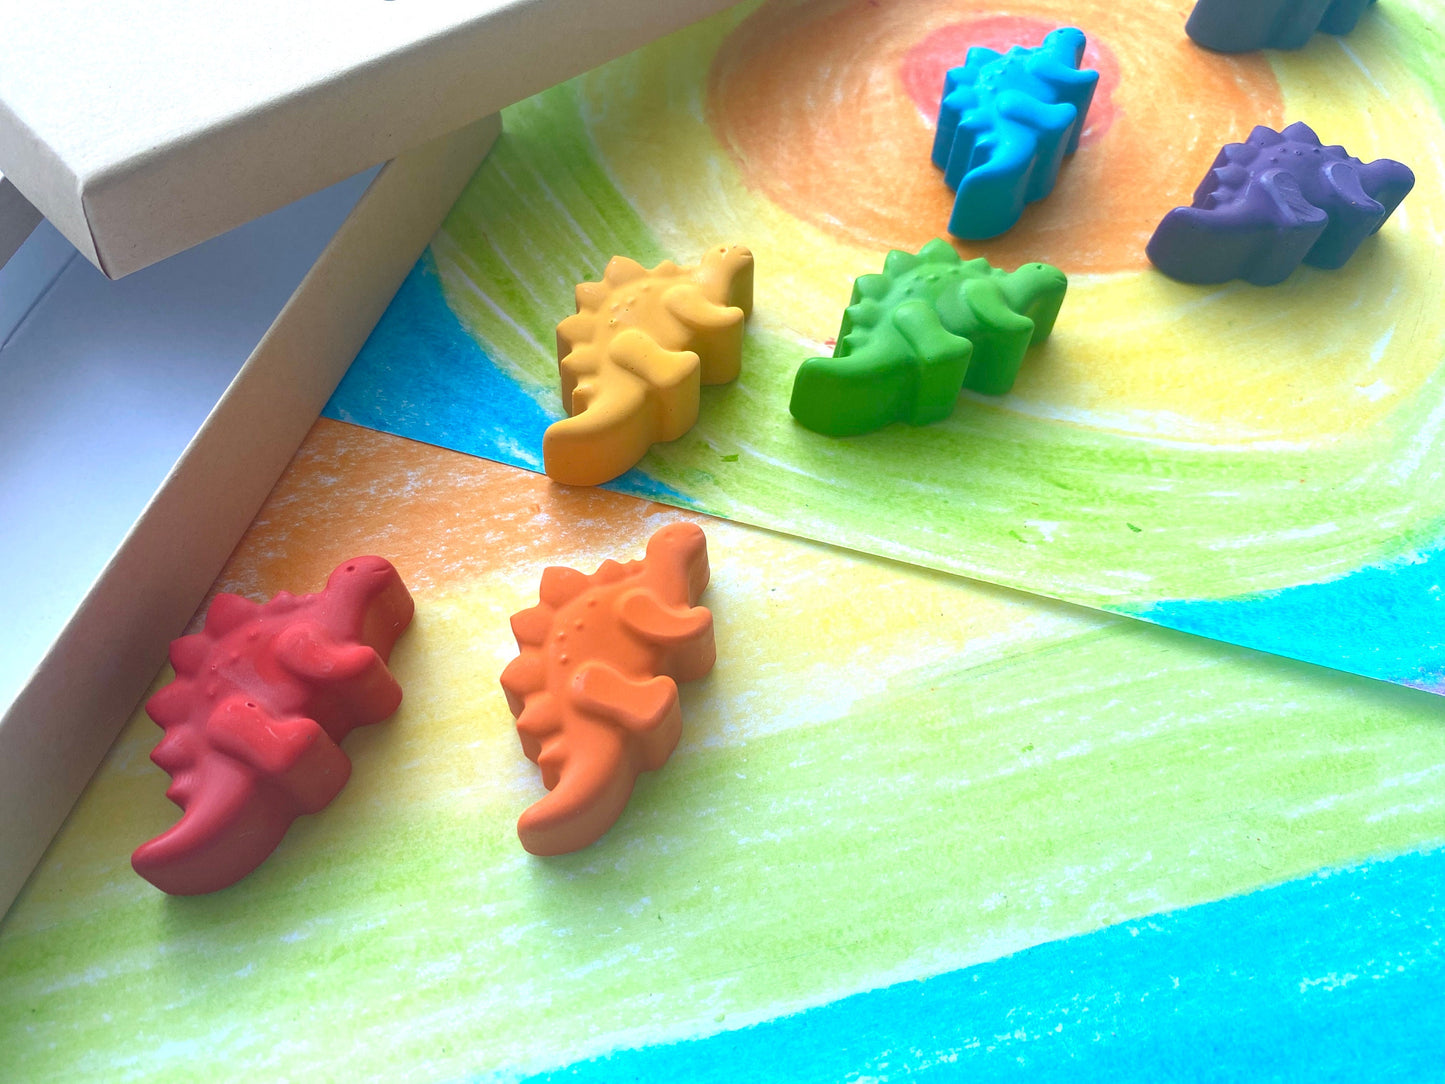 Dinosaur Crayons - Dinosaur Party Favors - Kids Gifts - Stocking Stuffers - Kids Birthday Gifts - Easter Basket Stuffers - Kids Party Favors